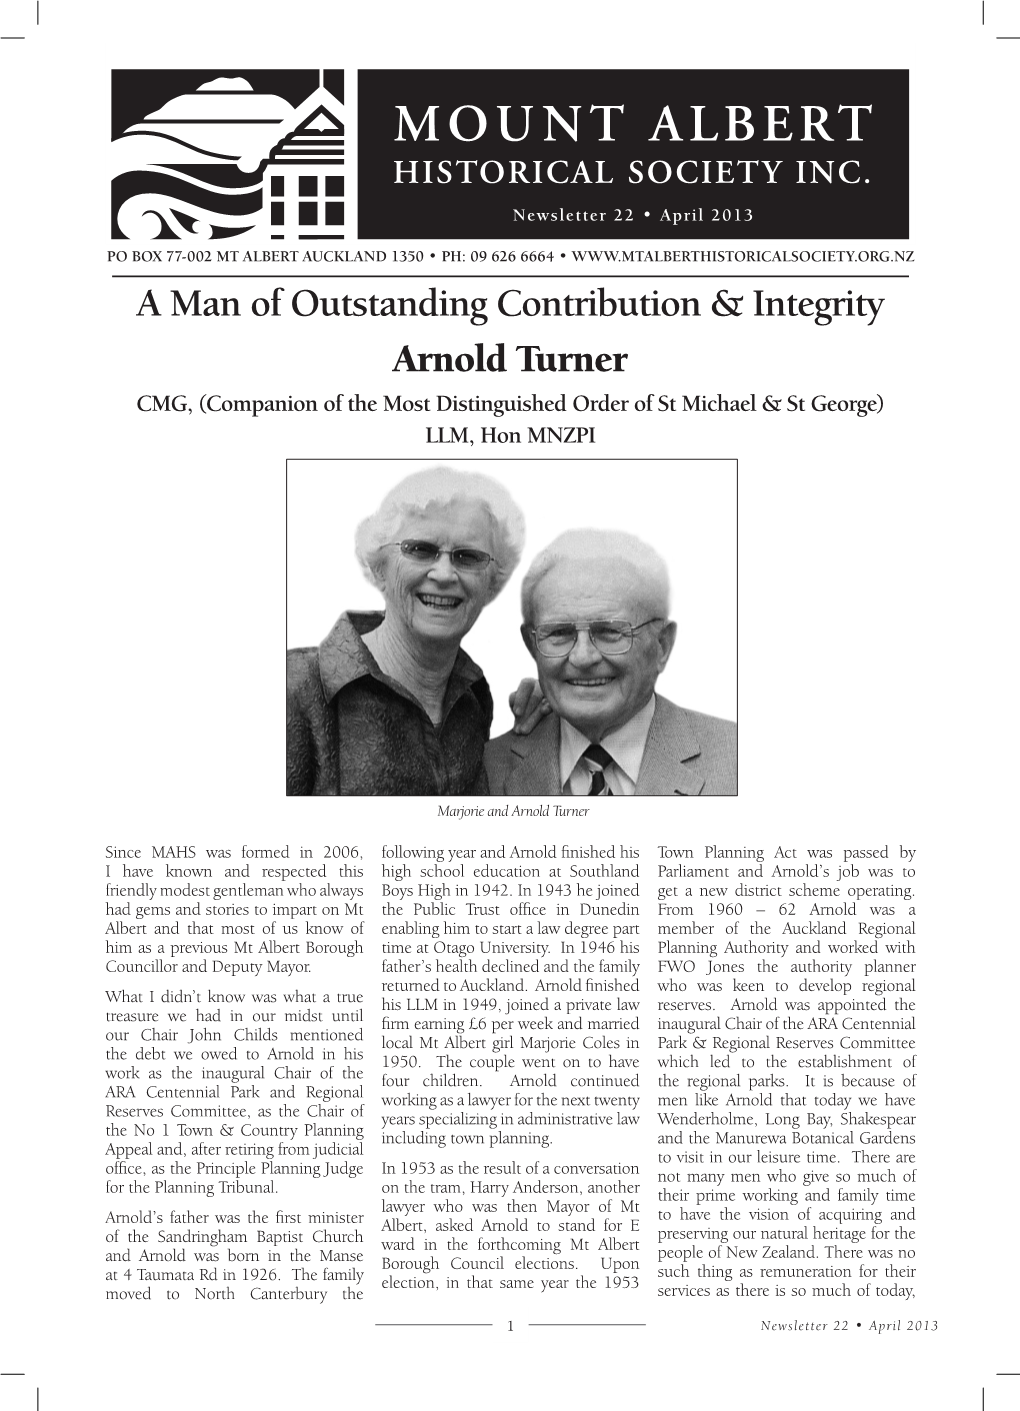 A Man of Outstanding Contribution & Integrity Arnold Turner